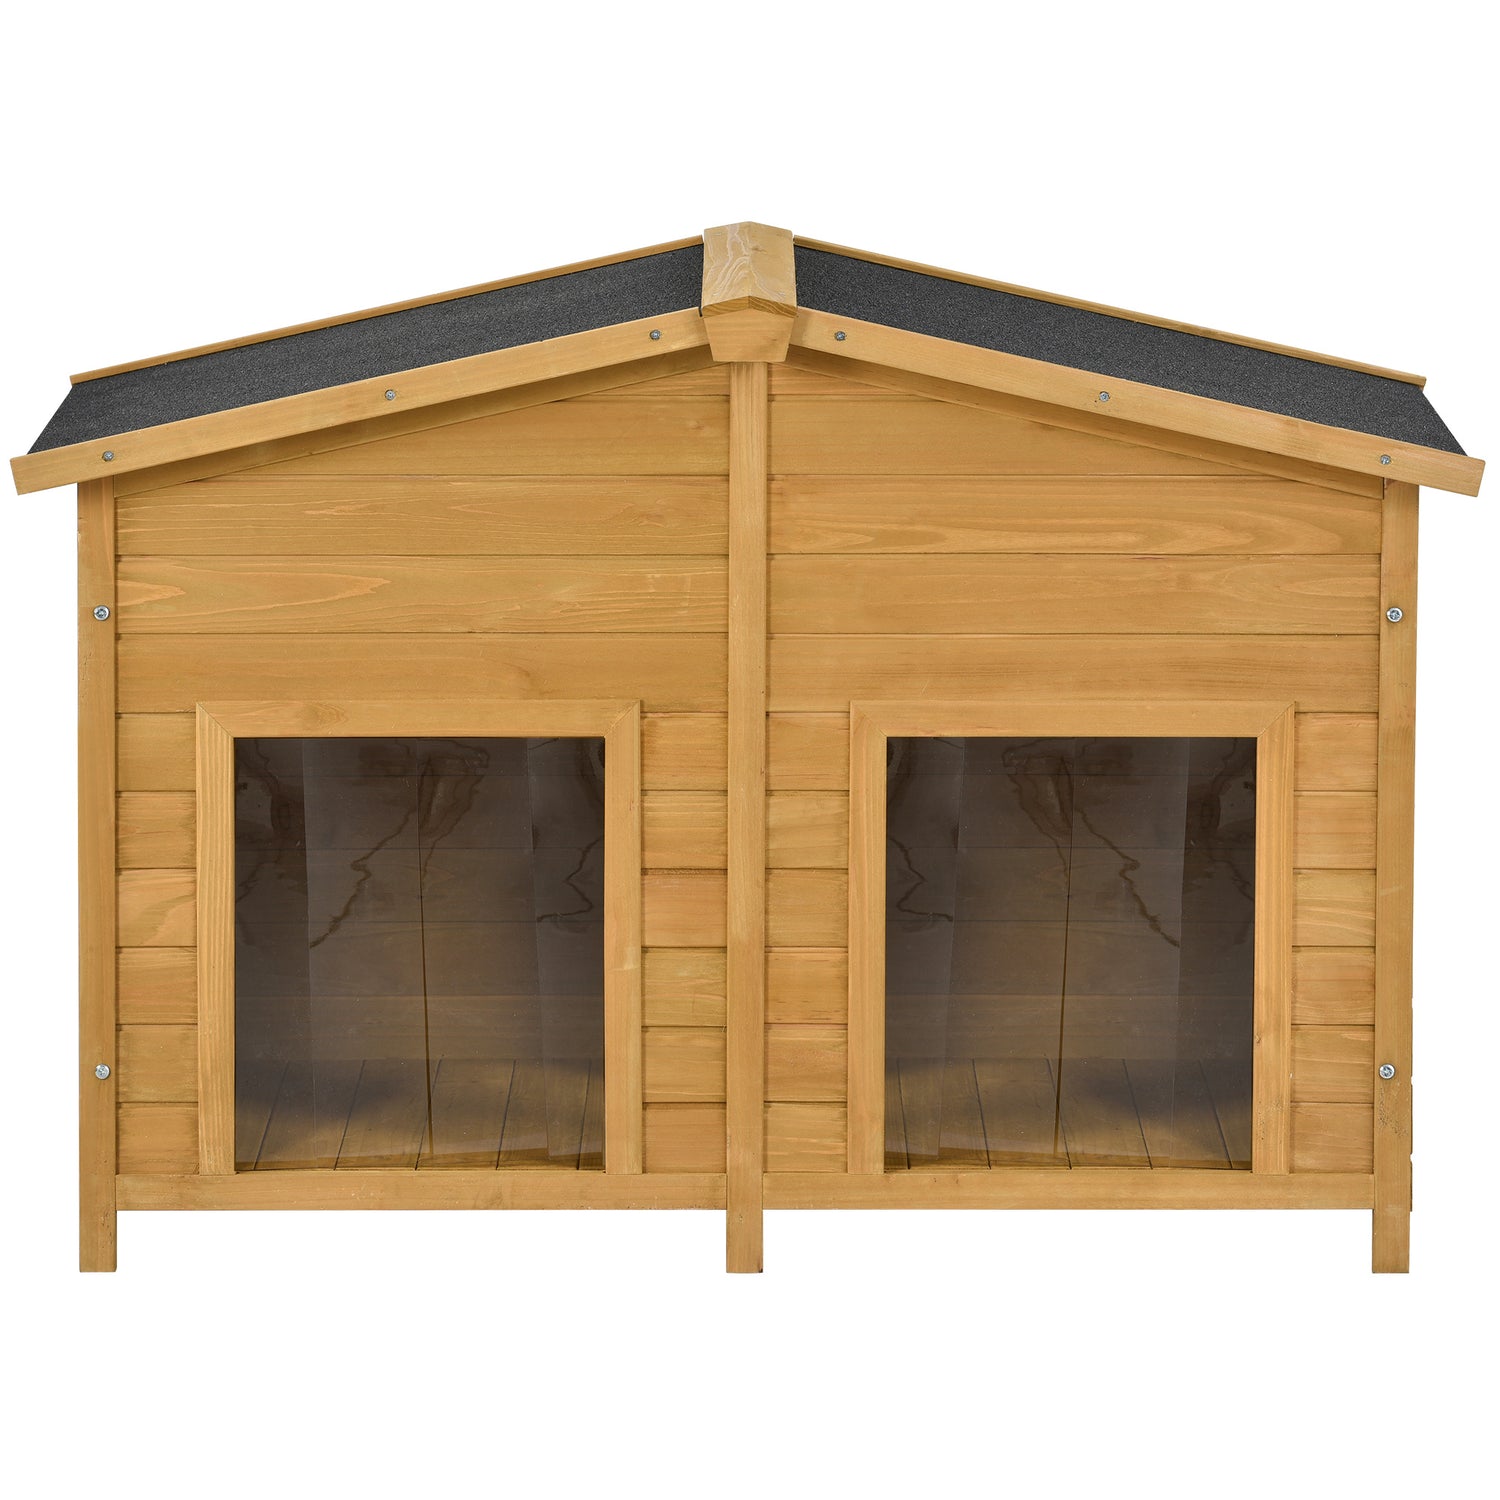 Anysun 47.2” Wooden Dog House Outdoor & Indoor Dog Crate